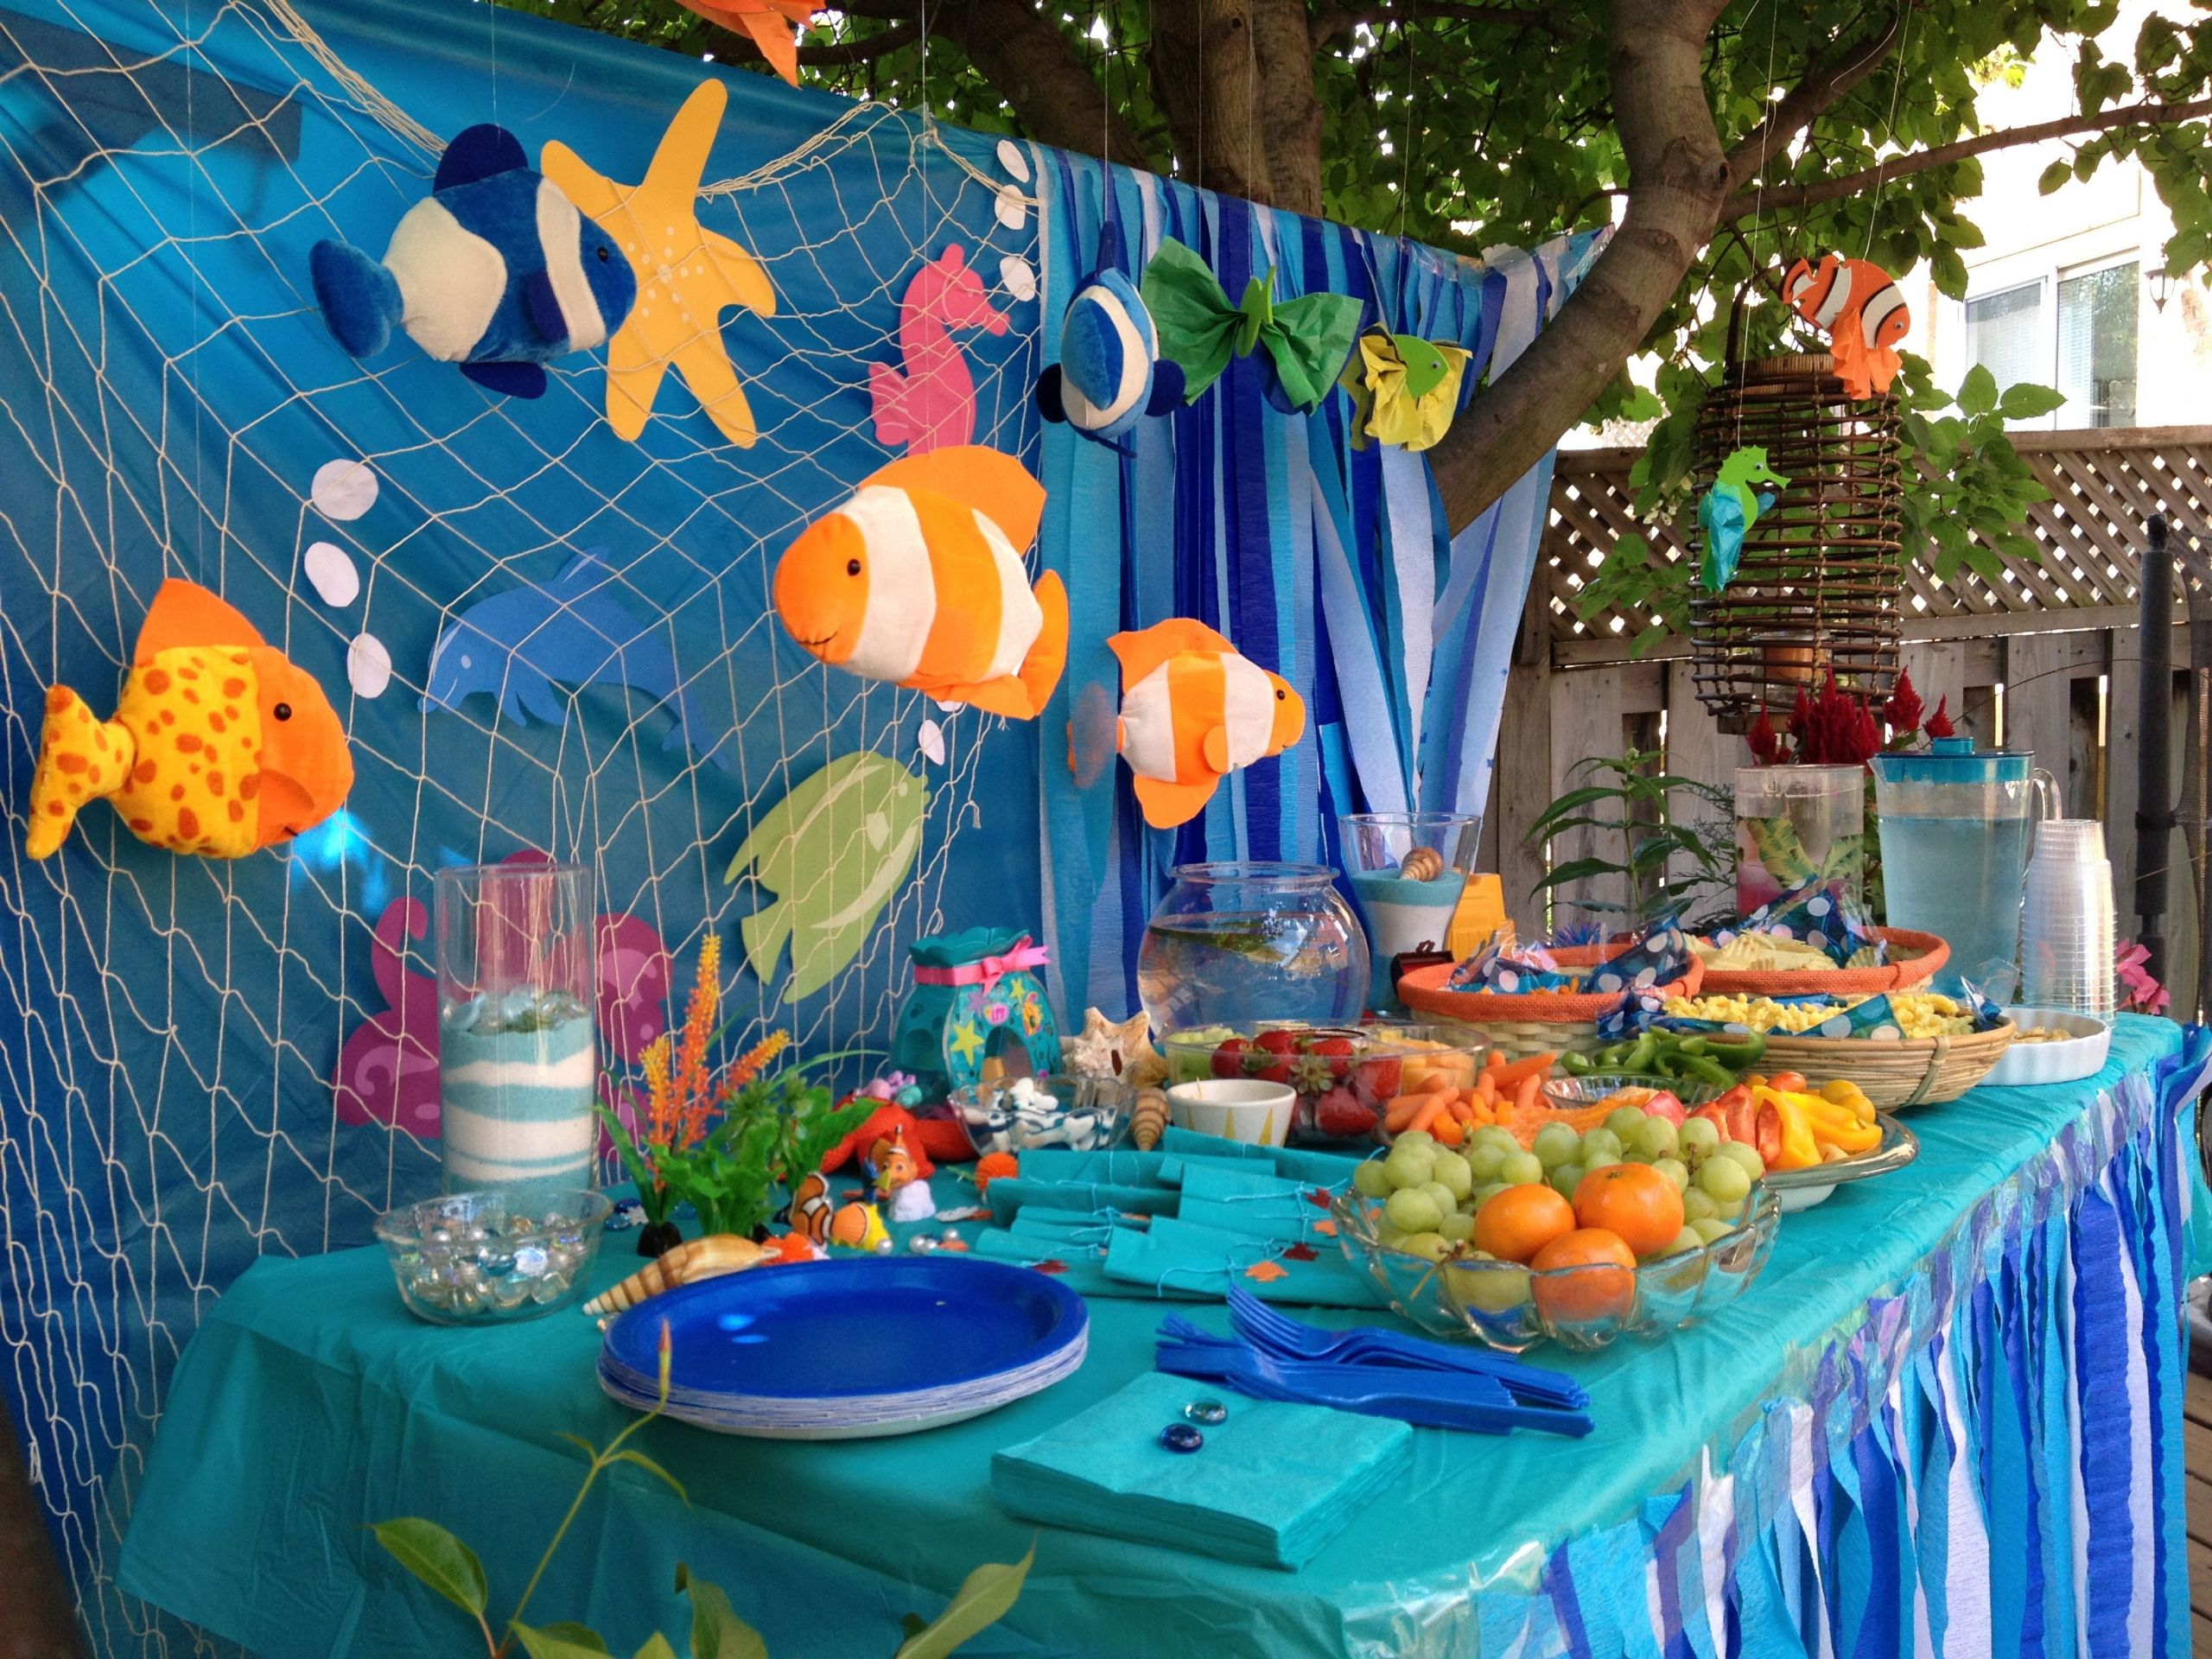 Under The Sea Birthday Decorations
 Decor for under the sea theme featuring items Doug at the